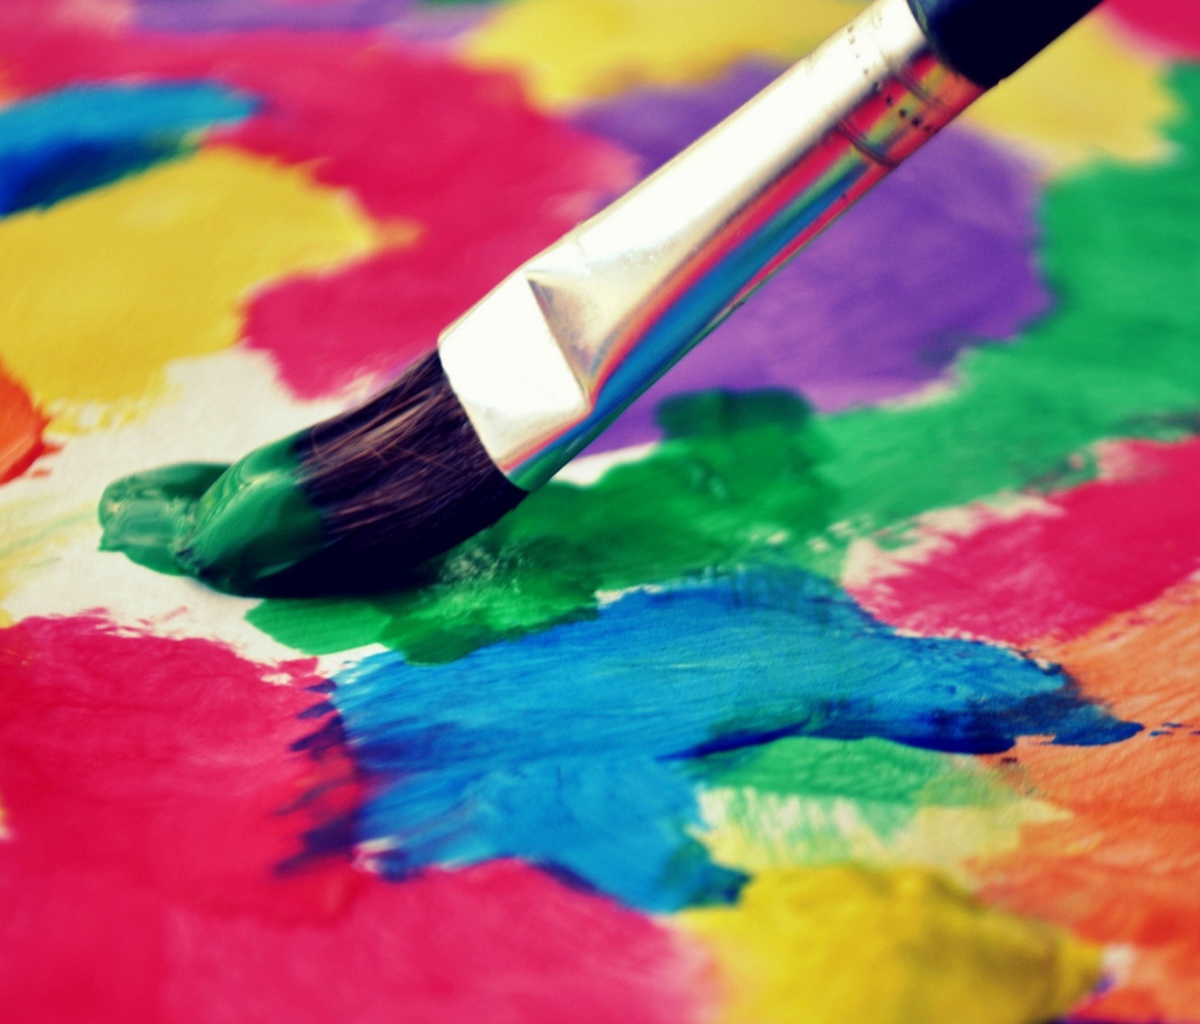 Art Brush And Colorful Paint wallpaper 1200x1024